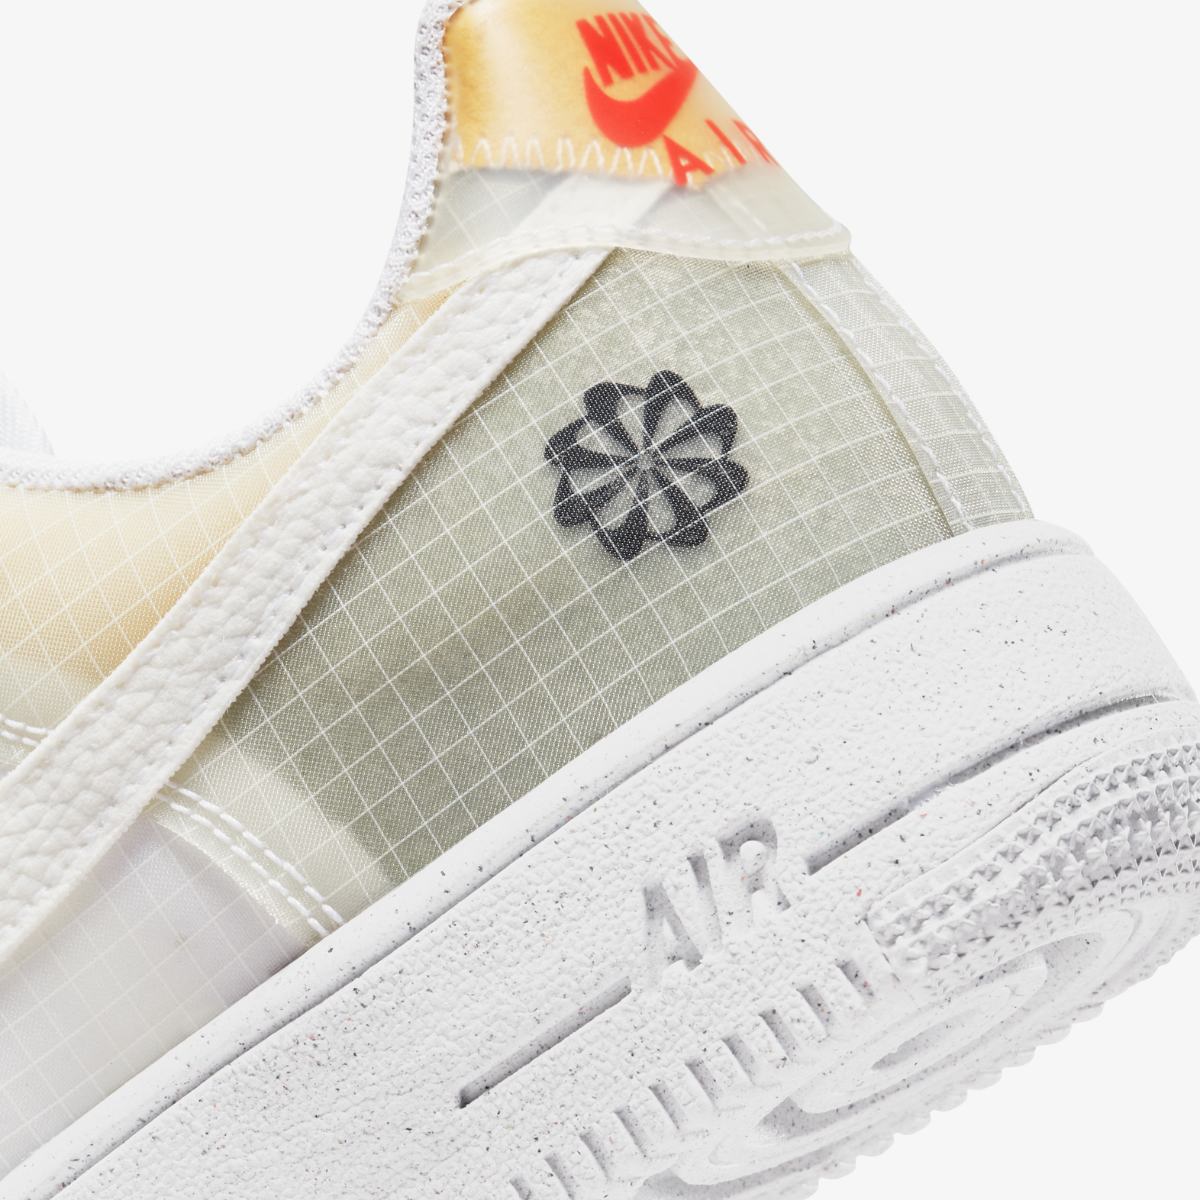 Кроссовки NIKE AIR FORCE 1 CRATER NN (GS)